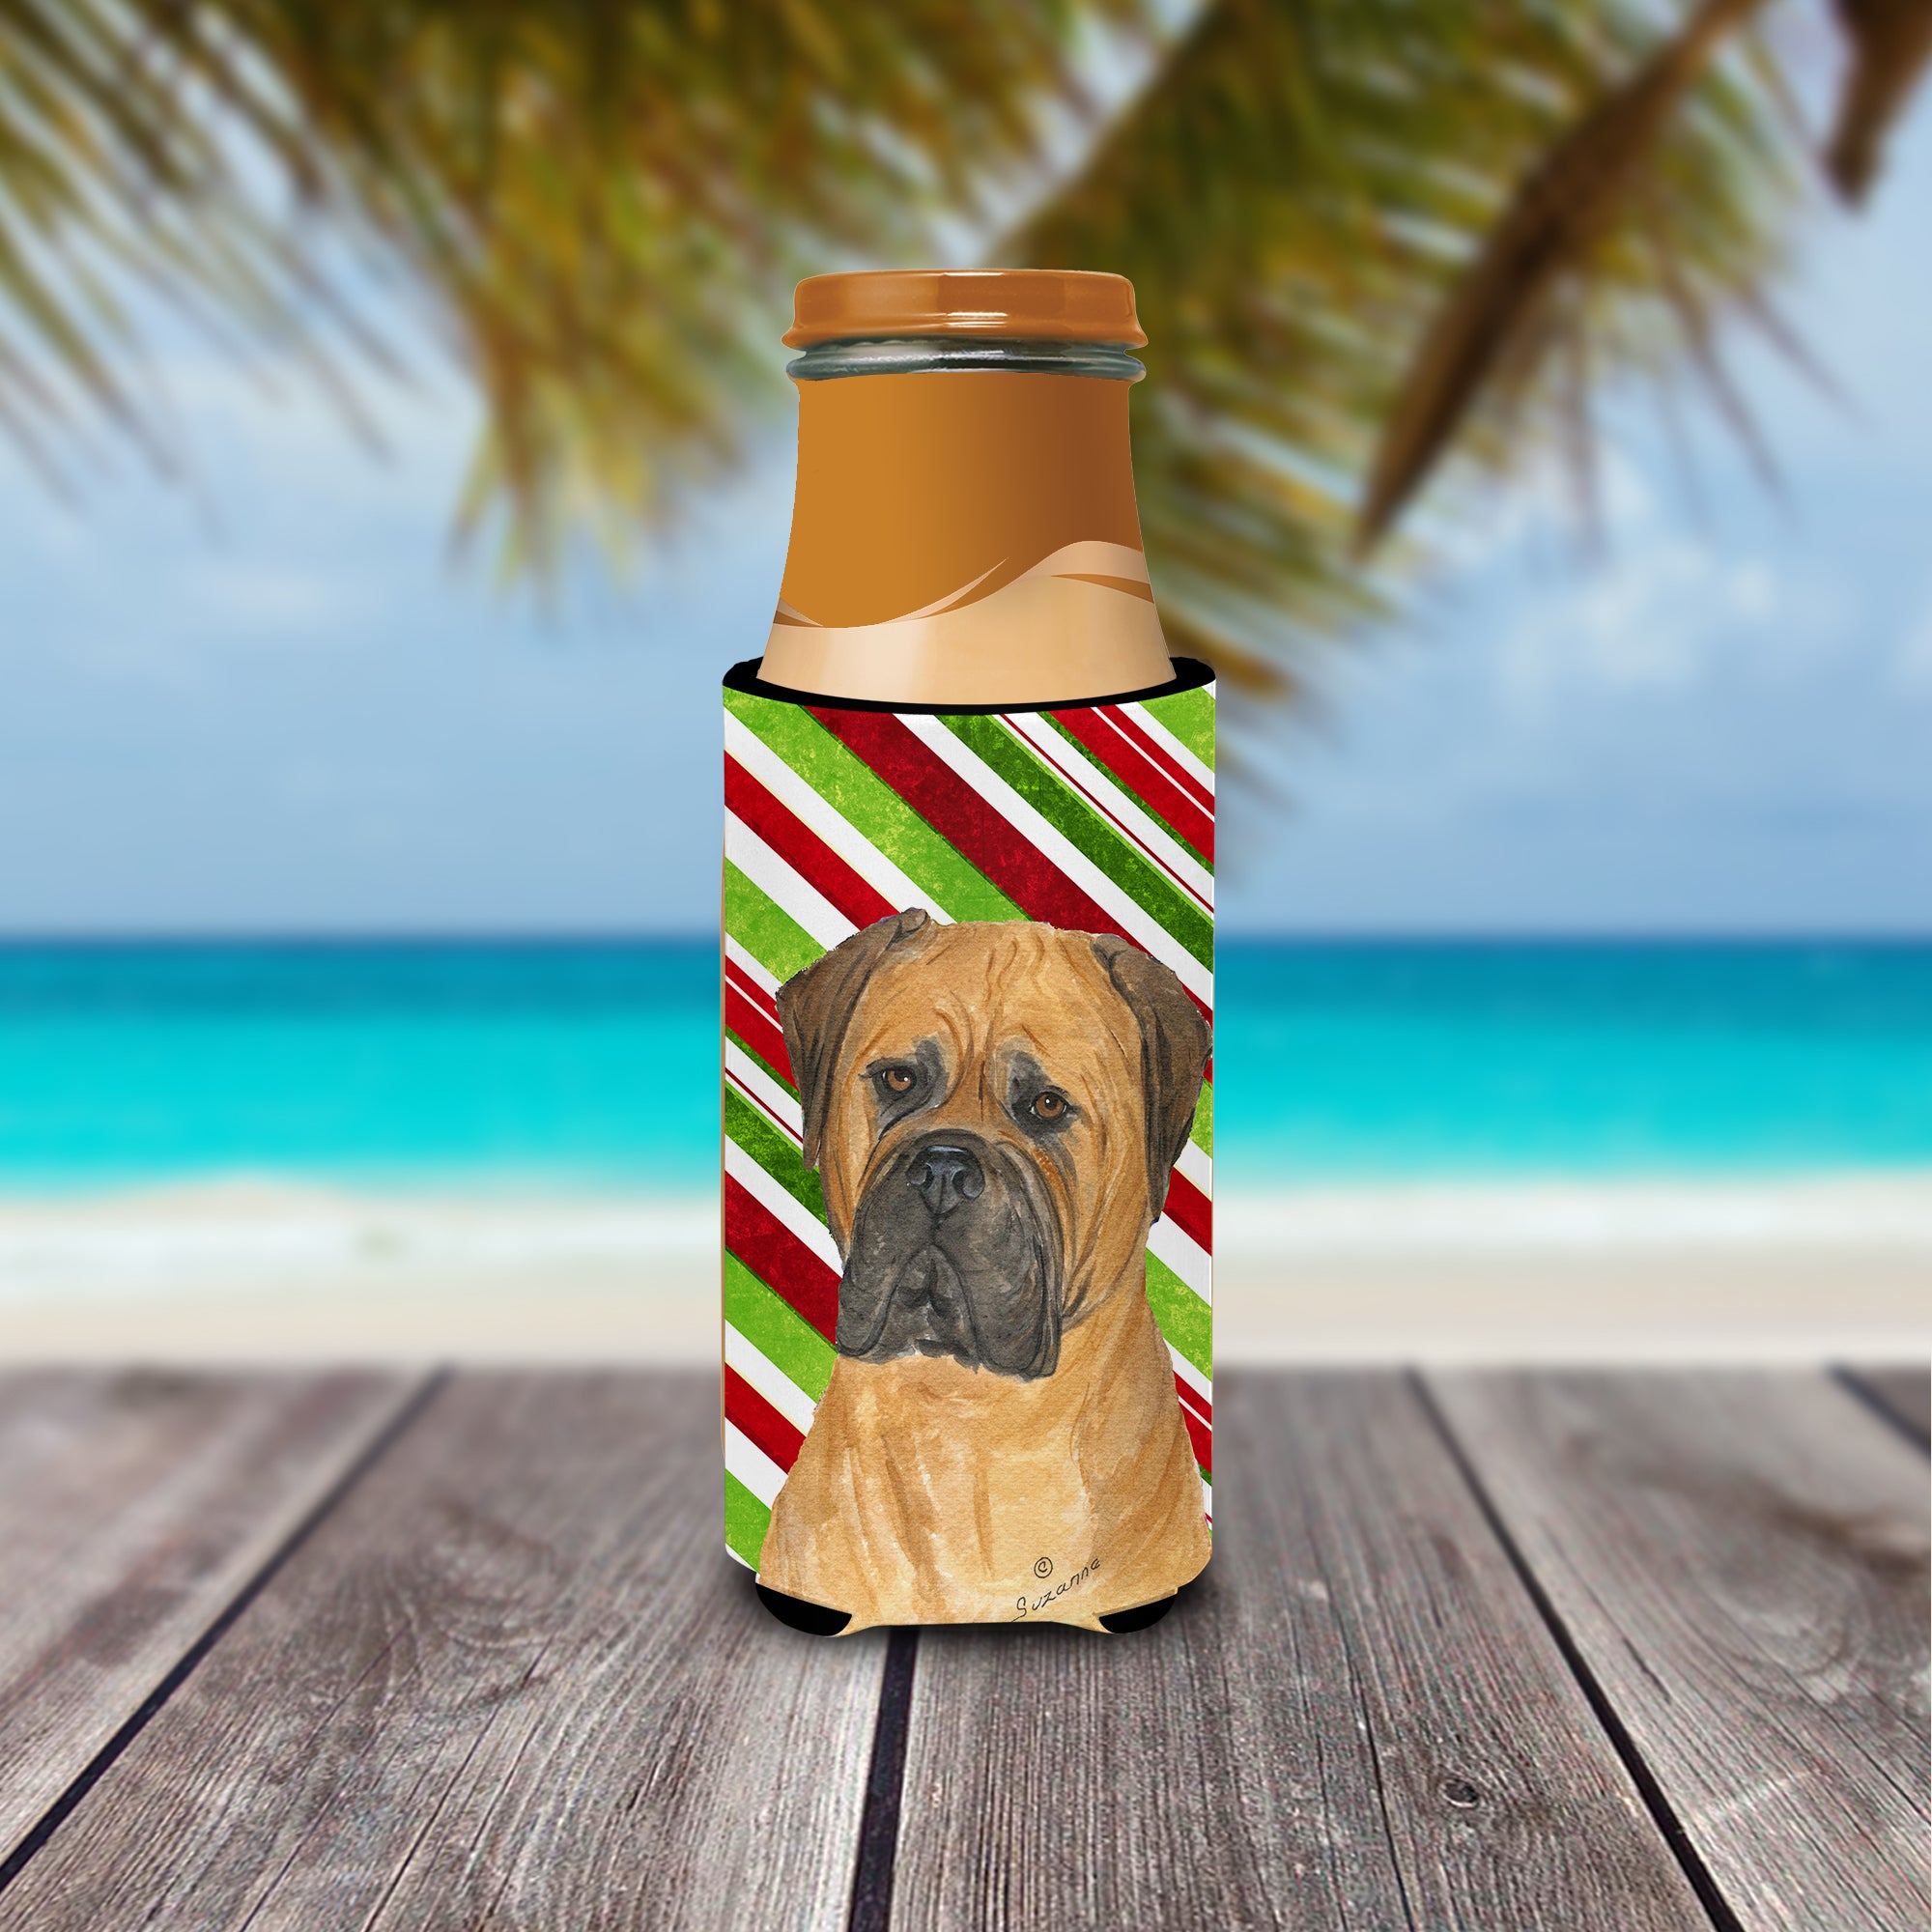 Bullmastiff Candy Cane Holiday Christmas Ultra Beverage Insulators for slim cans SS4586MUK.